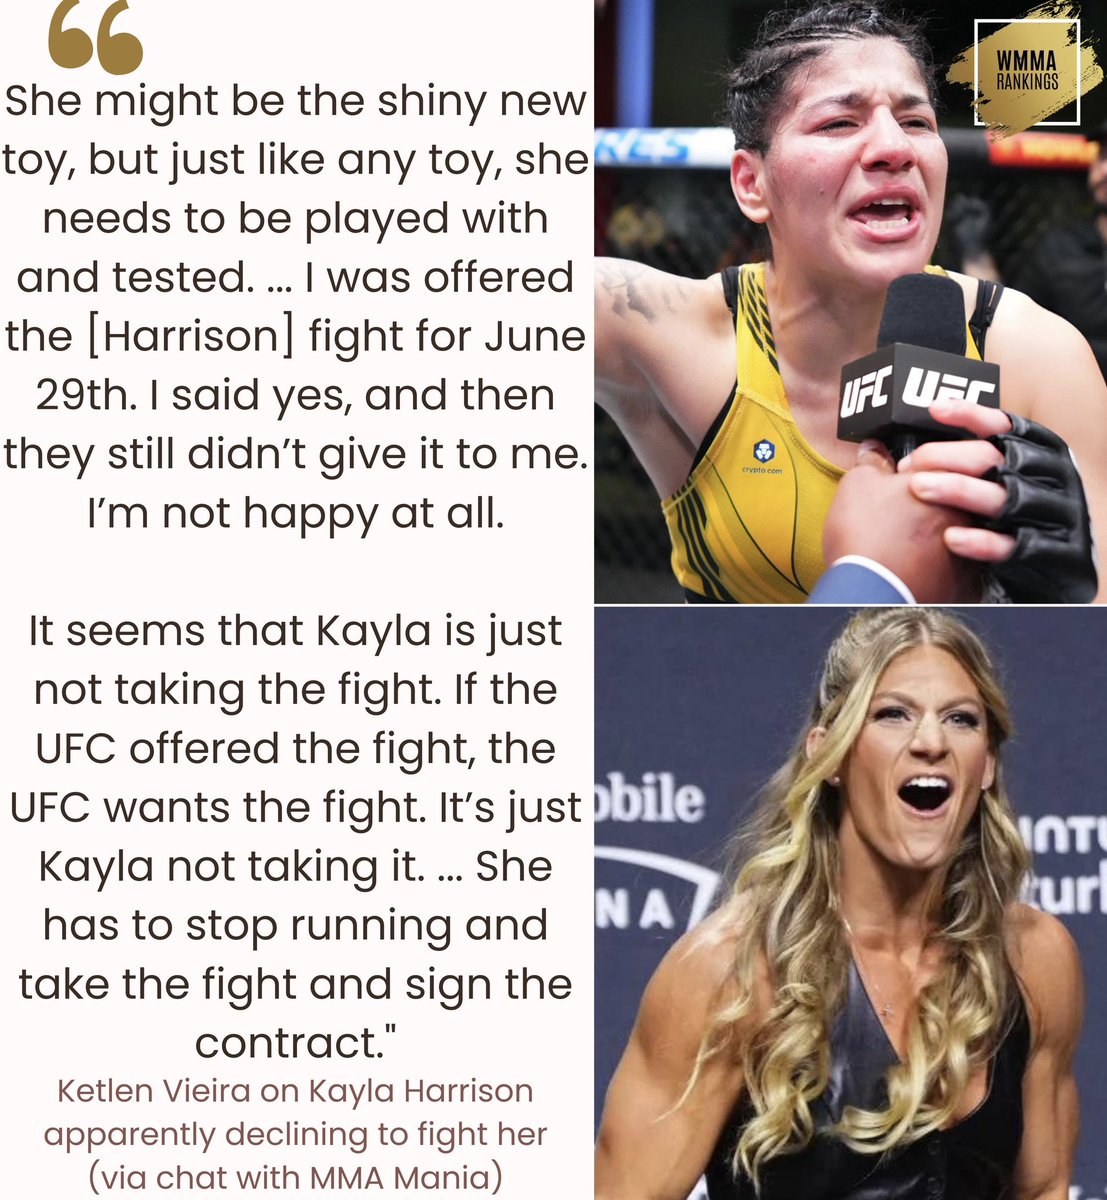 🗣️ #2 ranked UFC bantamweight contender 🇧🇷 Ketlen Vieira persists in her call-outs of #4 🇺🇸 Kayla Harrison. Vieira alleges Harrison turned down a bout offer for #UFC303 on June 29. #WMMA #UFC